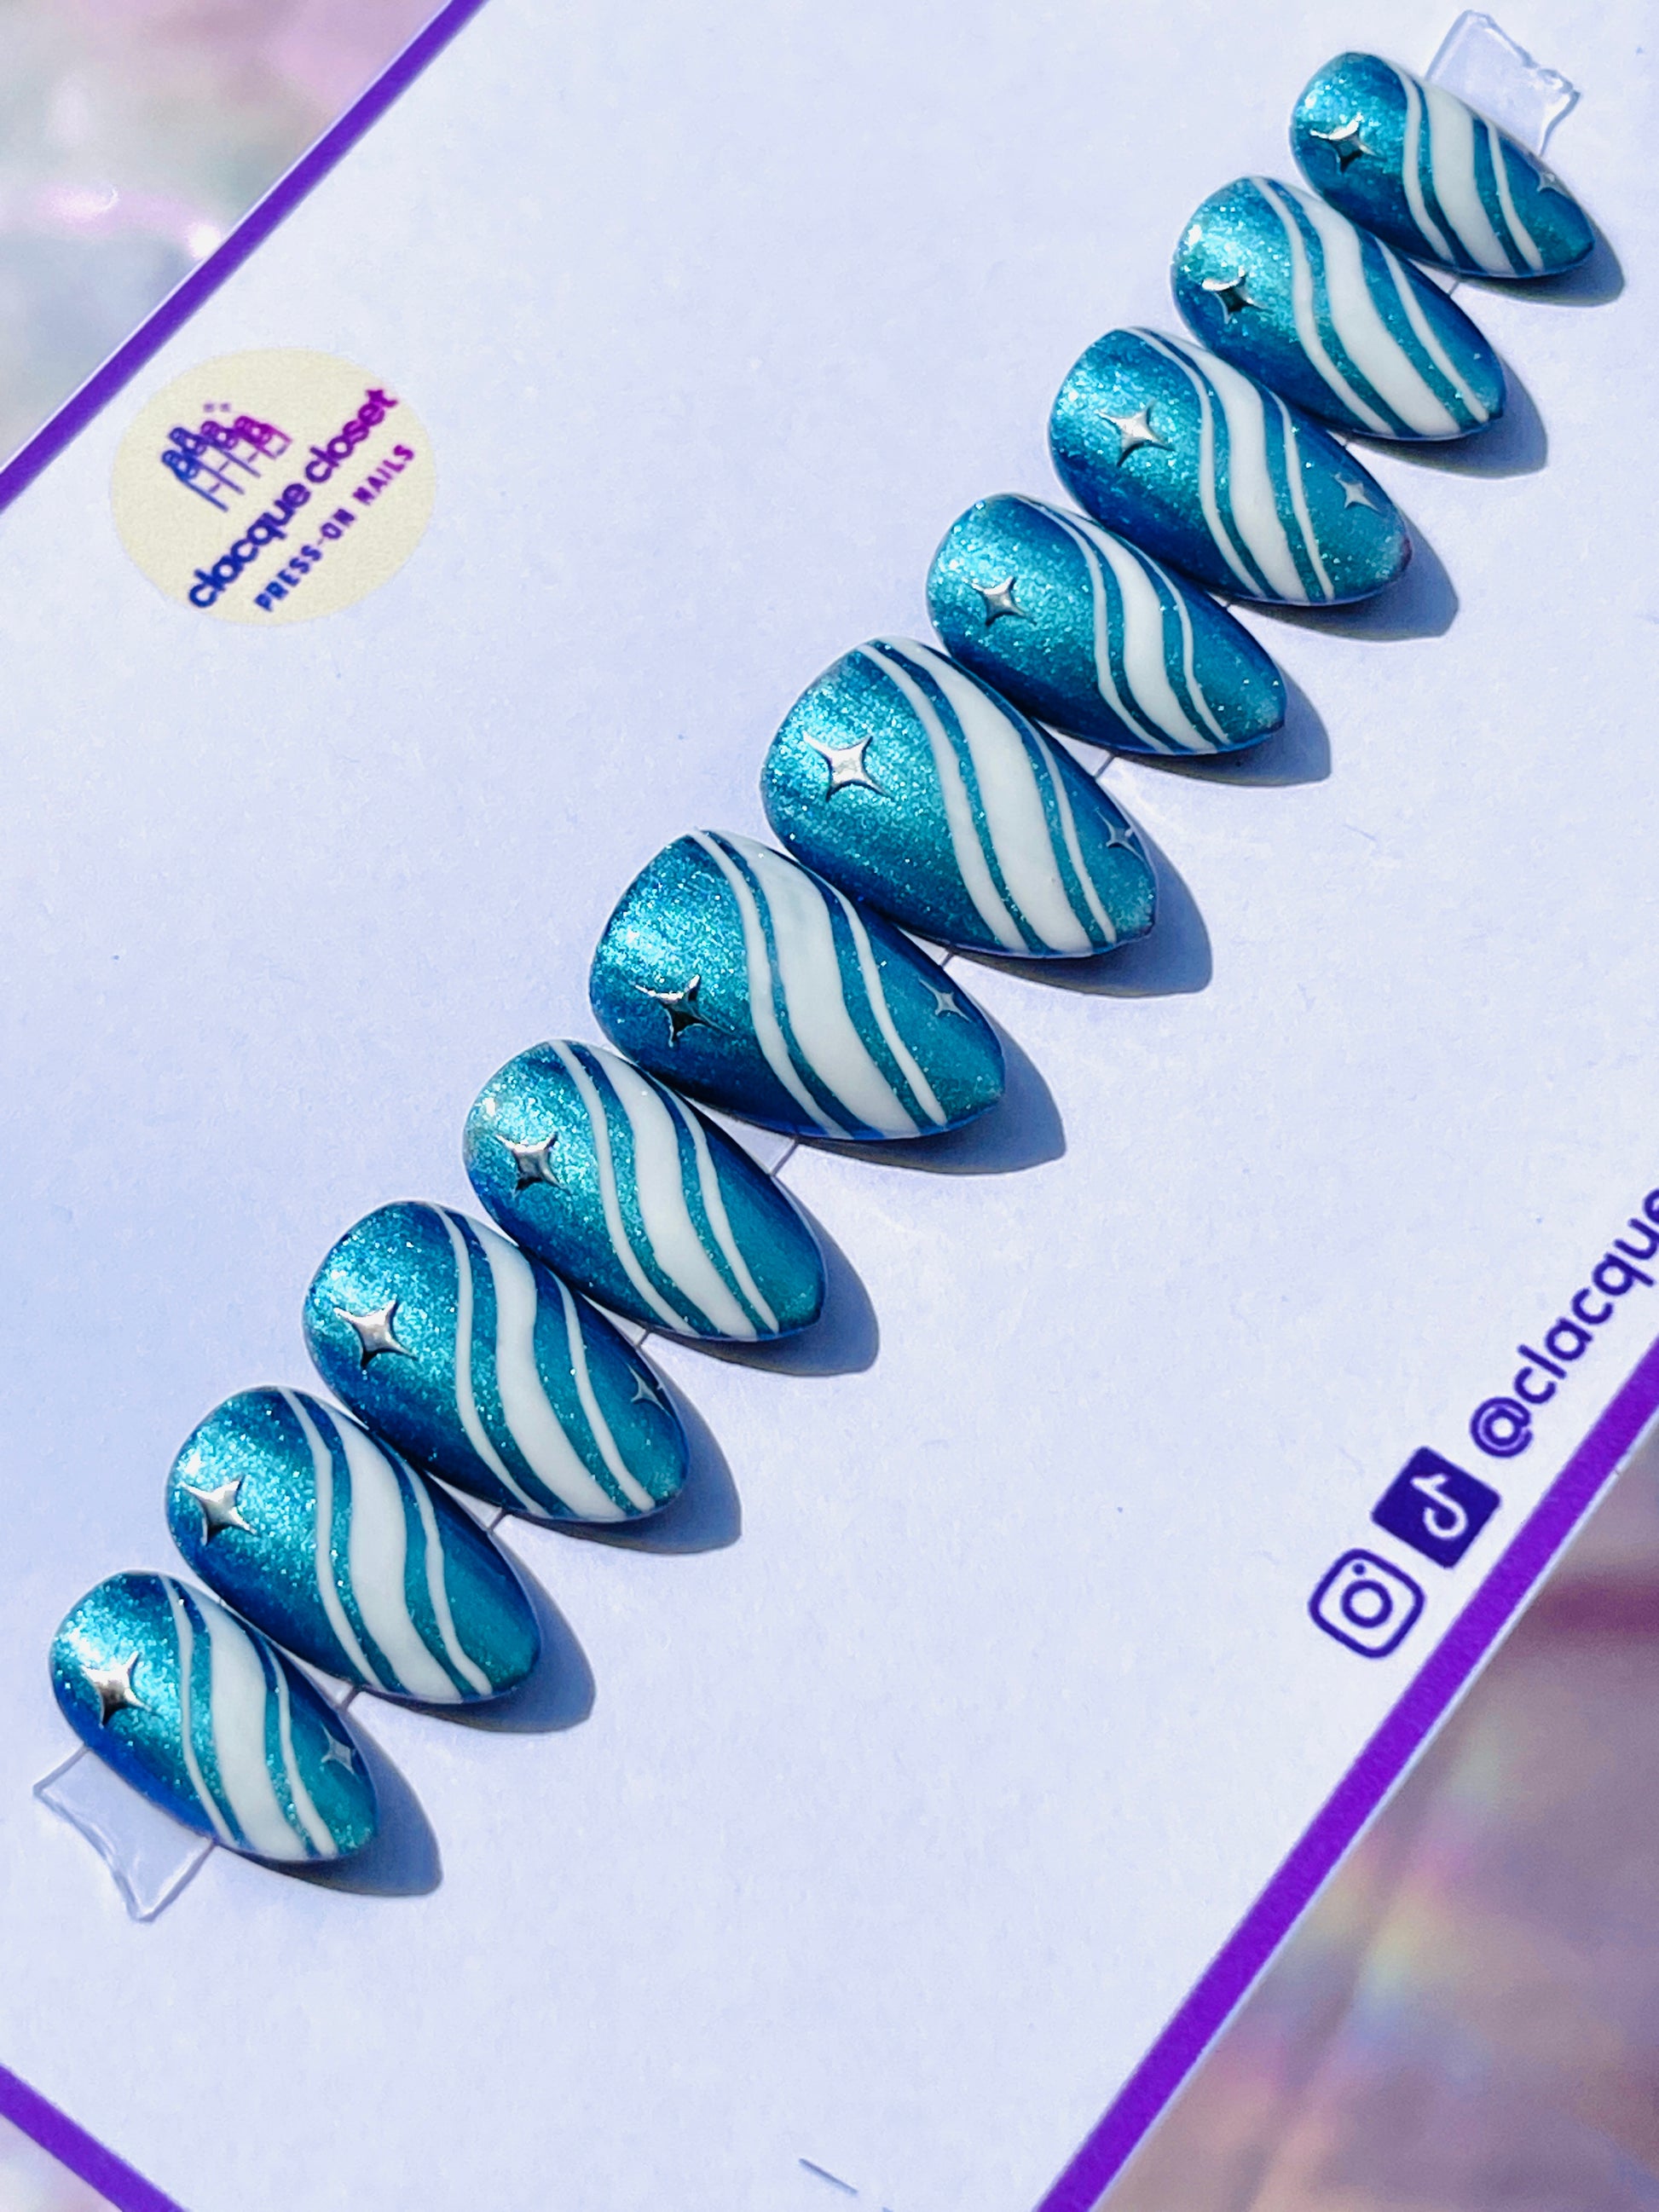 Medium-length almond-shaped nails in a sparkly blue color, detailed with white curvy lines and adorned with silver stars, creating a whimsical night sky effect.